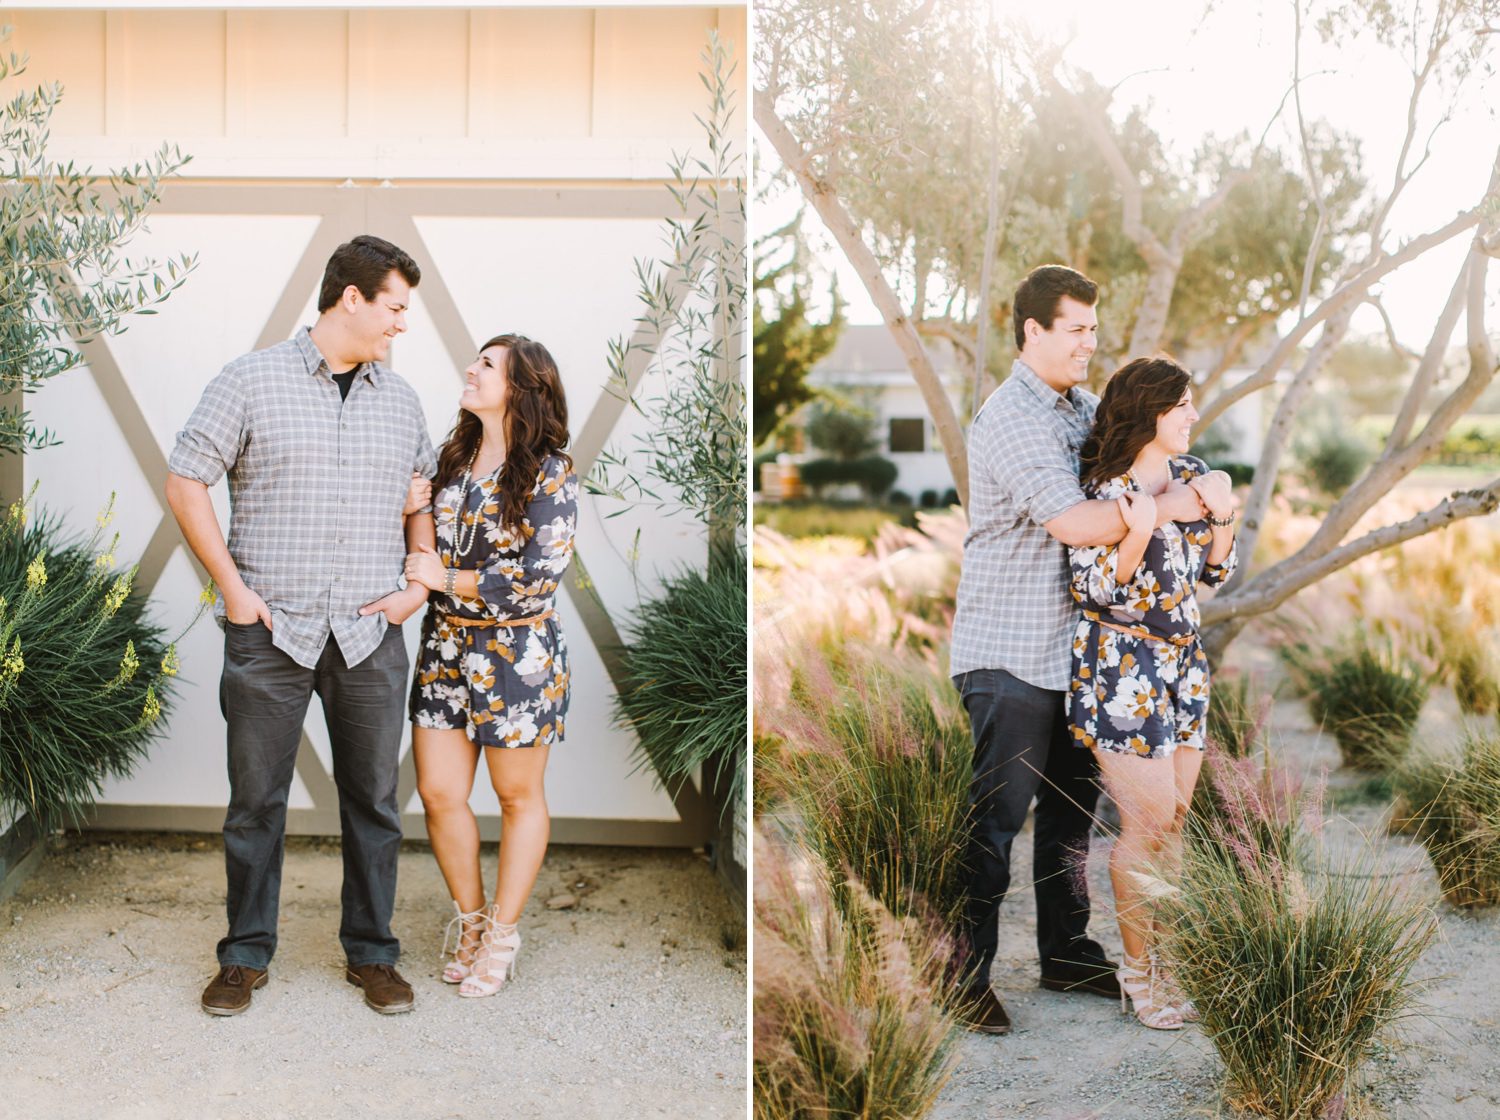 Biddle Ranch Engagement session by San Luis Obispo photographer Jessica Sofranko